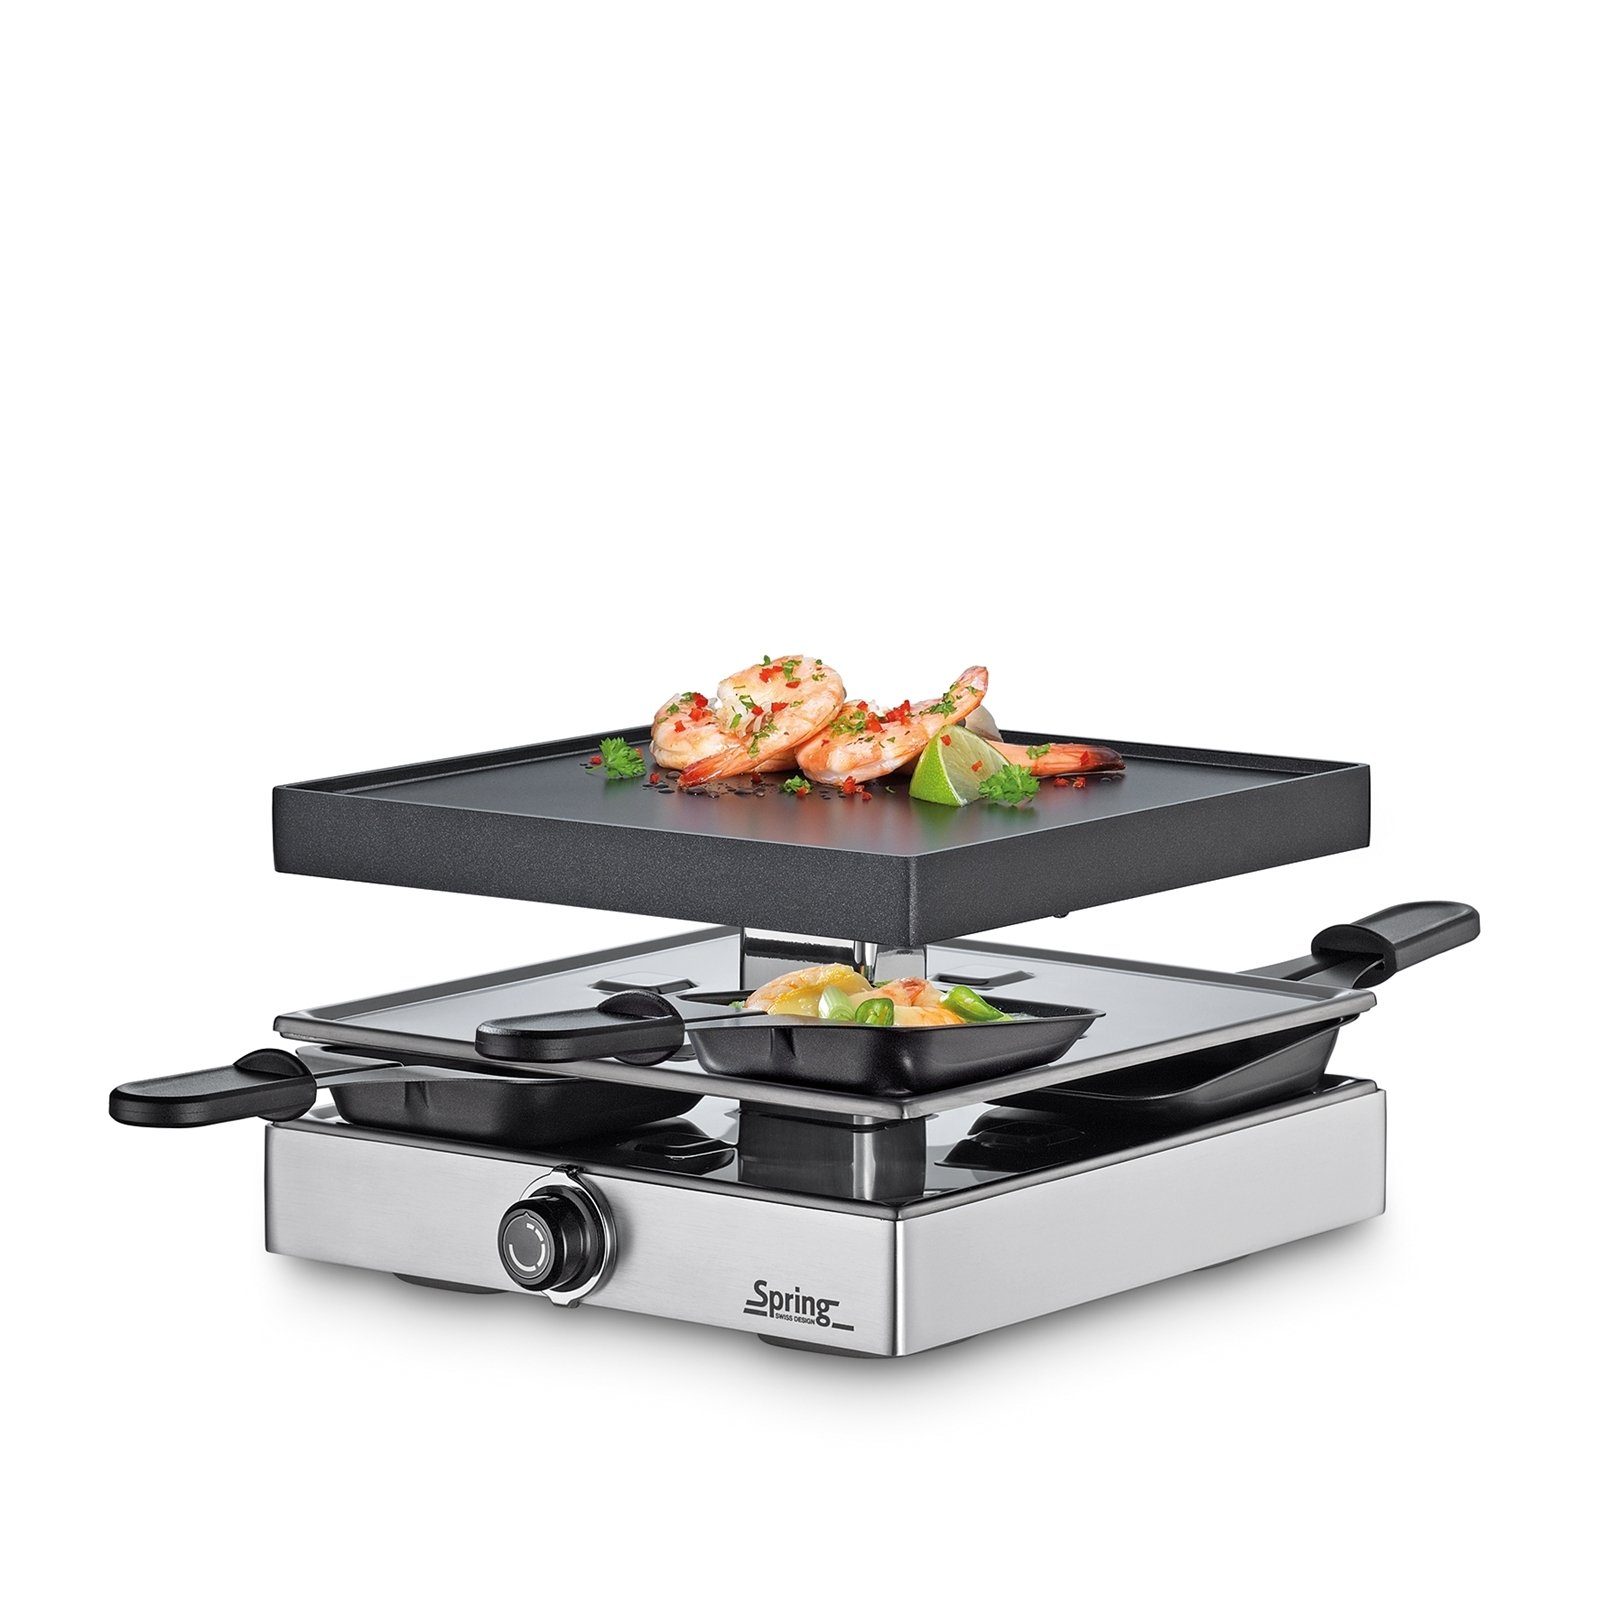 Spring Raclette Raclette 4 mit Alugrillplatte Classic Silber | Raclette